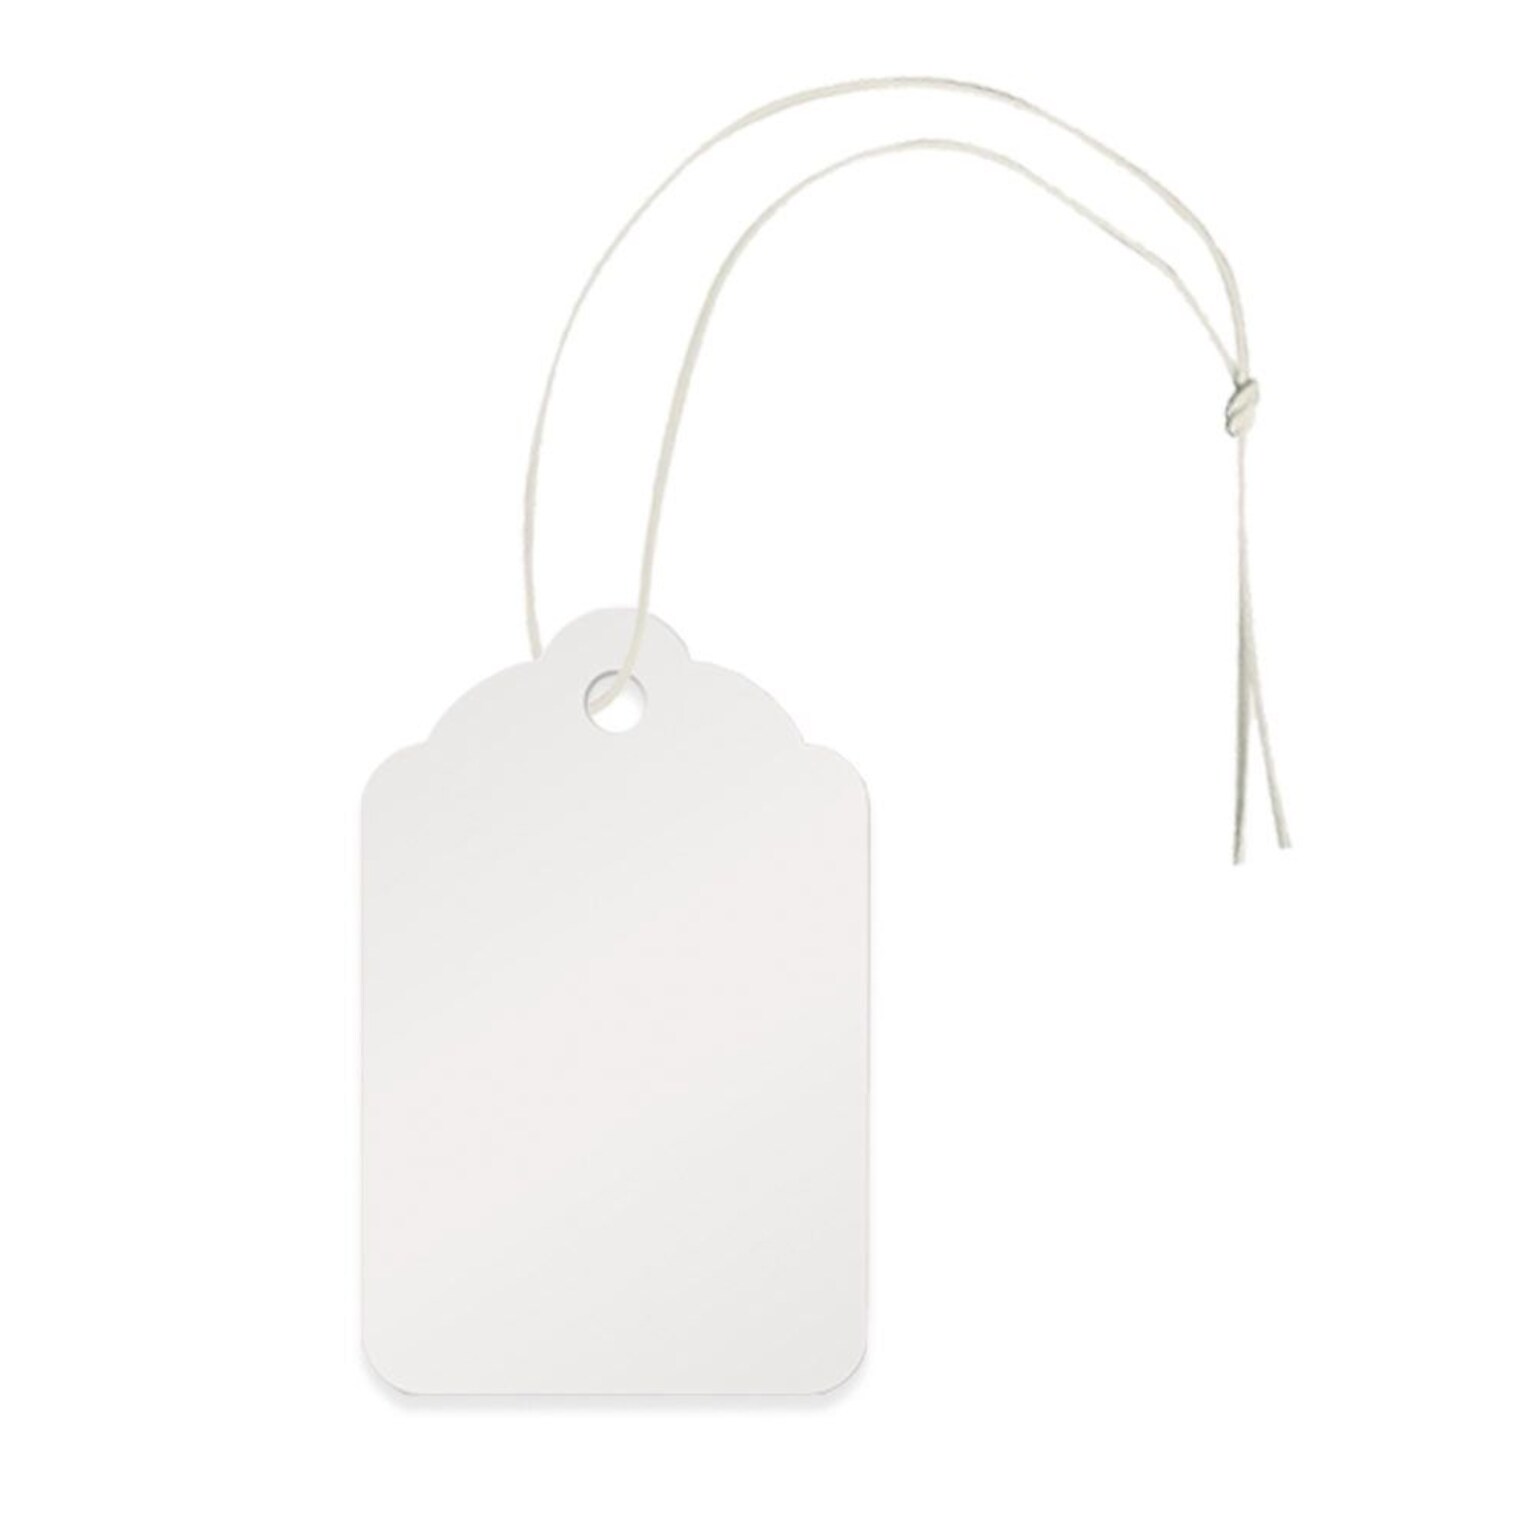 NAHANCO 1 x 1 1/2 Strung All Purpose Merchandise Tag, White, 1000/Pack